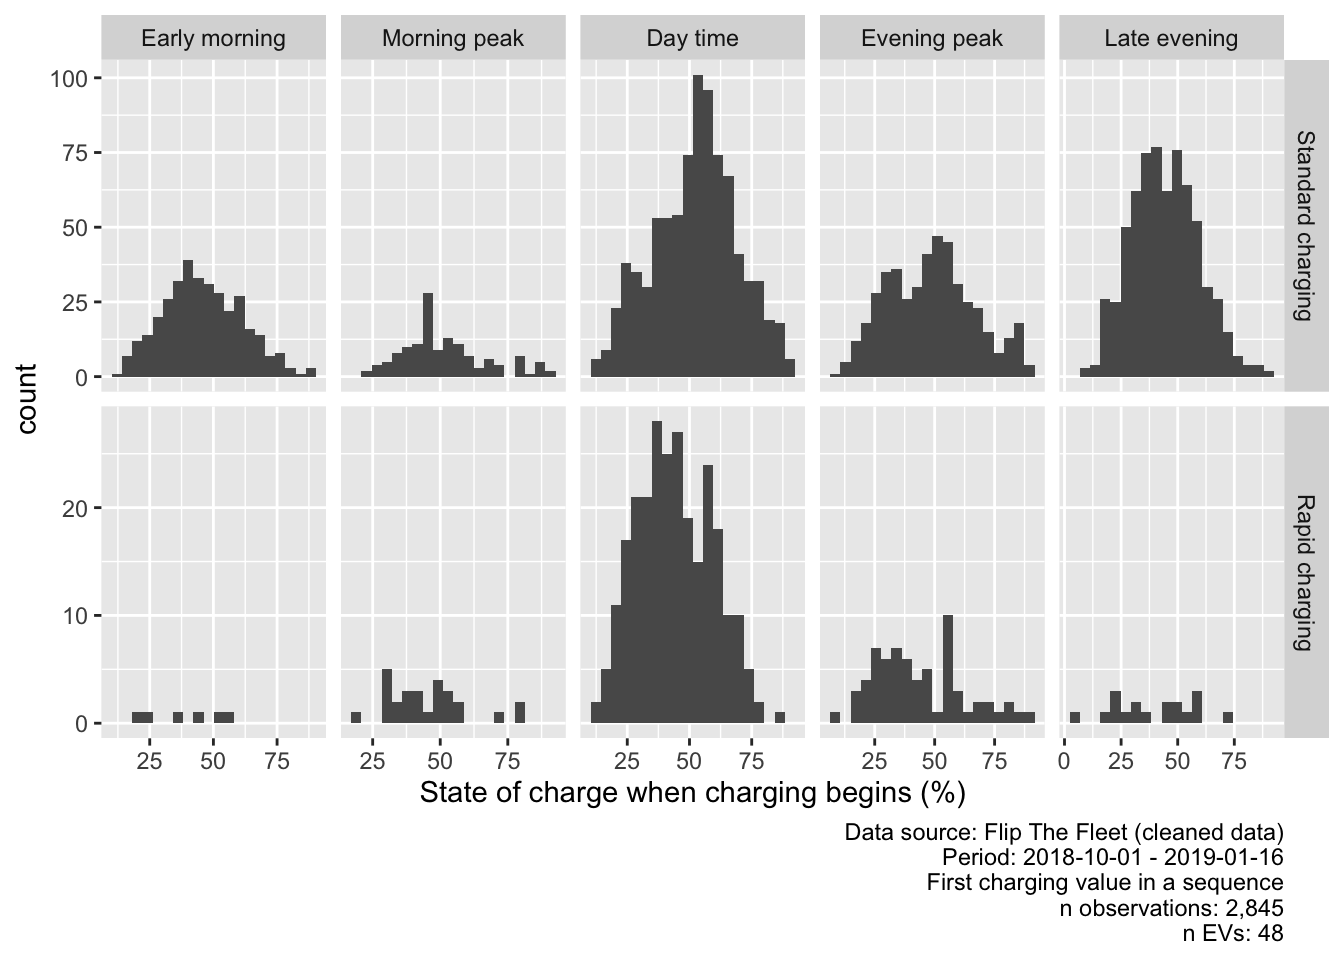 Value of state of charge at beginning of charging sequence (chargeType corrected, values > 90% removed)